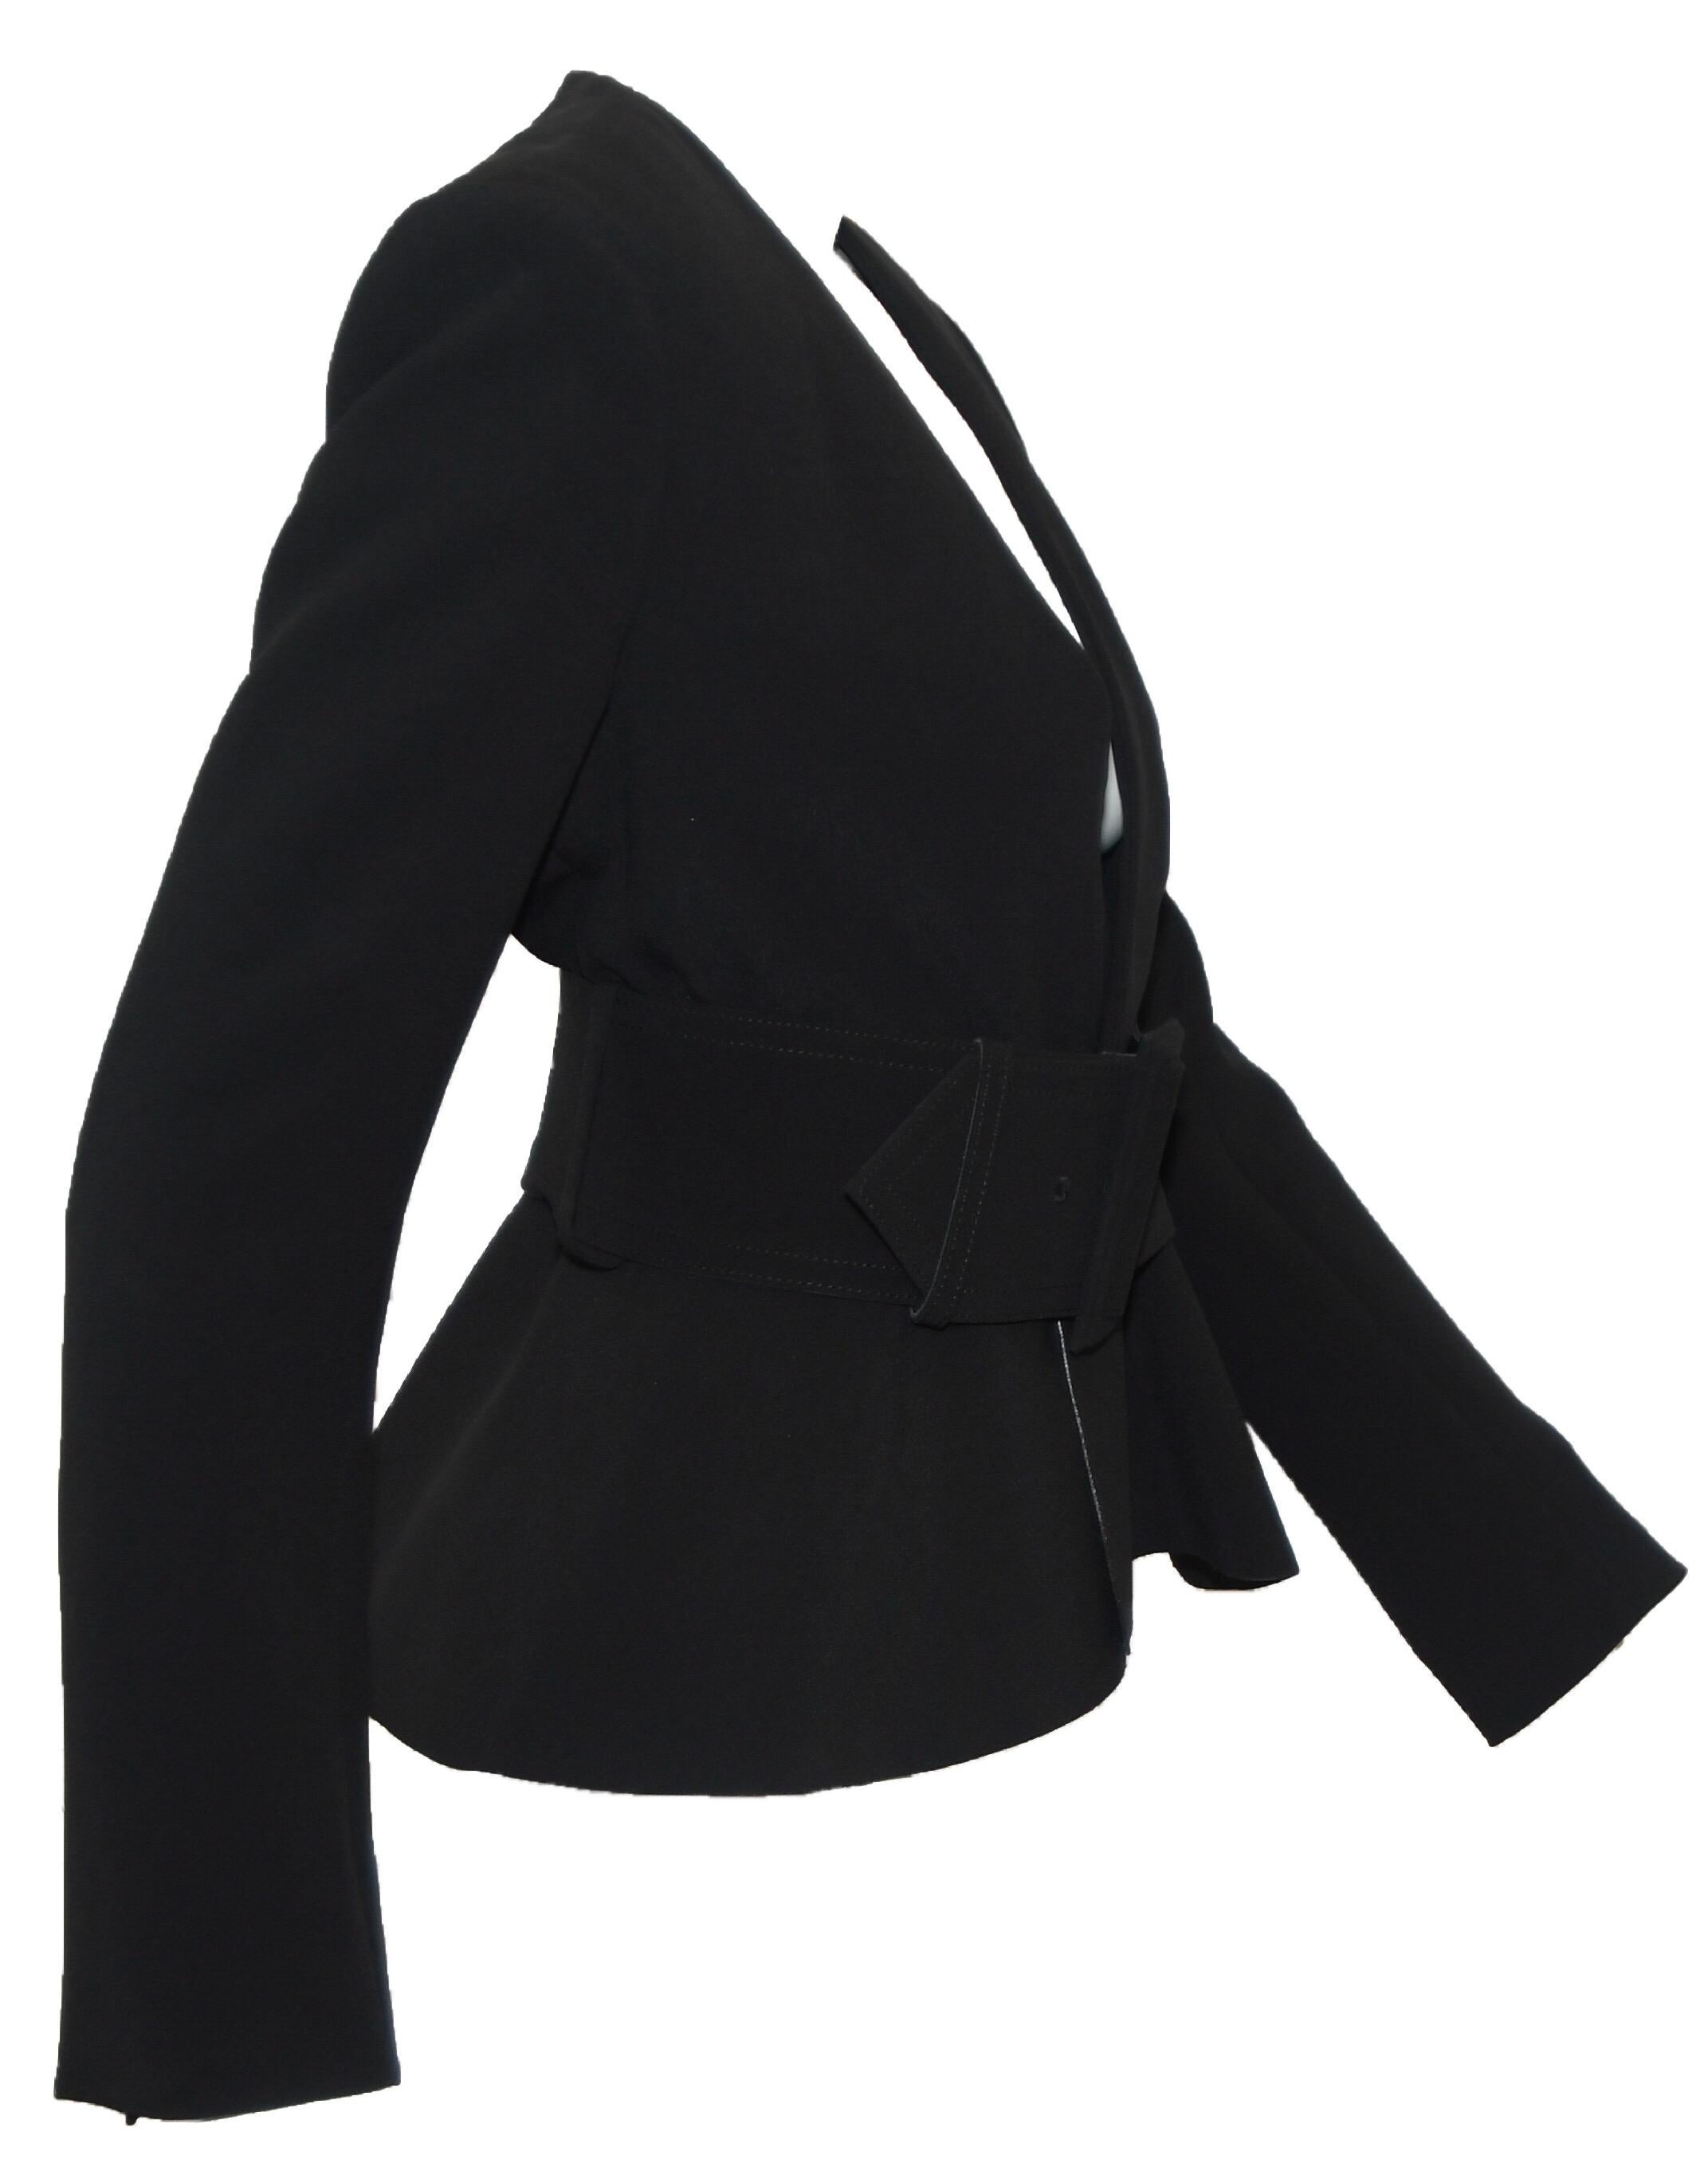 Celine's celebrated classic, minimalist and clean lines have made Pheobe Philo a household name.  Staying true to her initial ideology of polished pieces, this belted, peplum jacket incorporates a 3.50